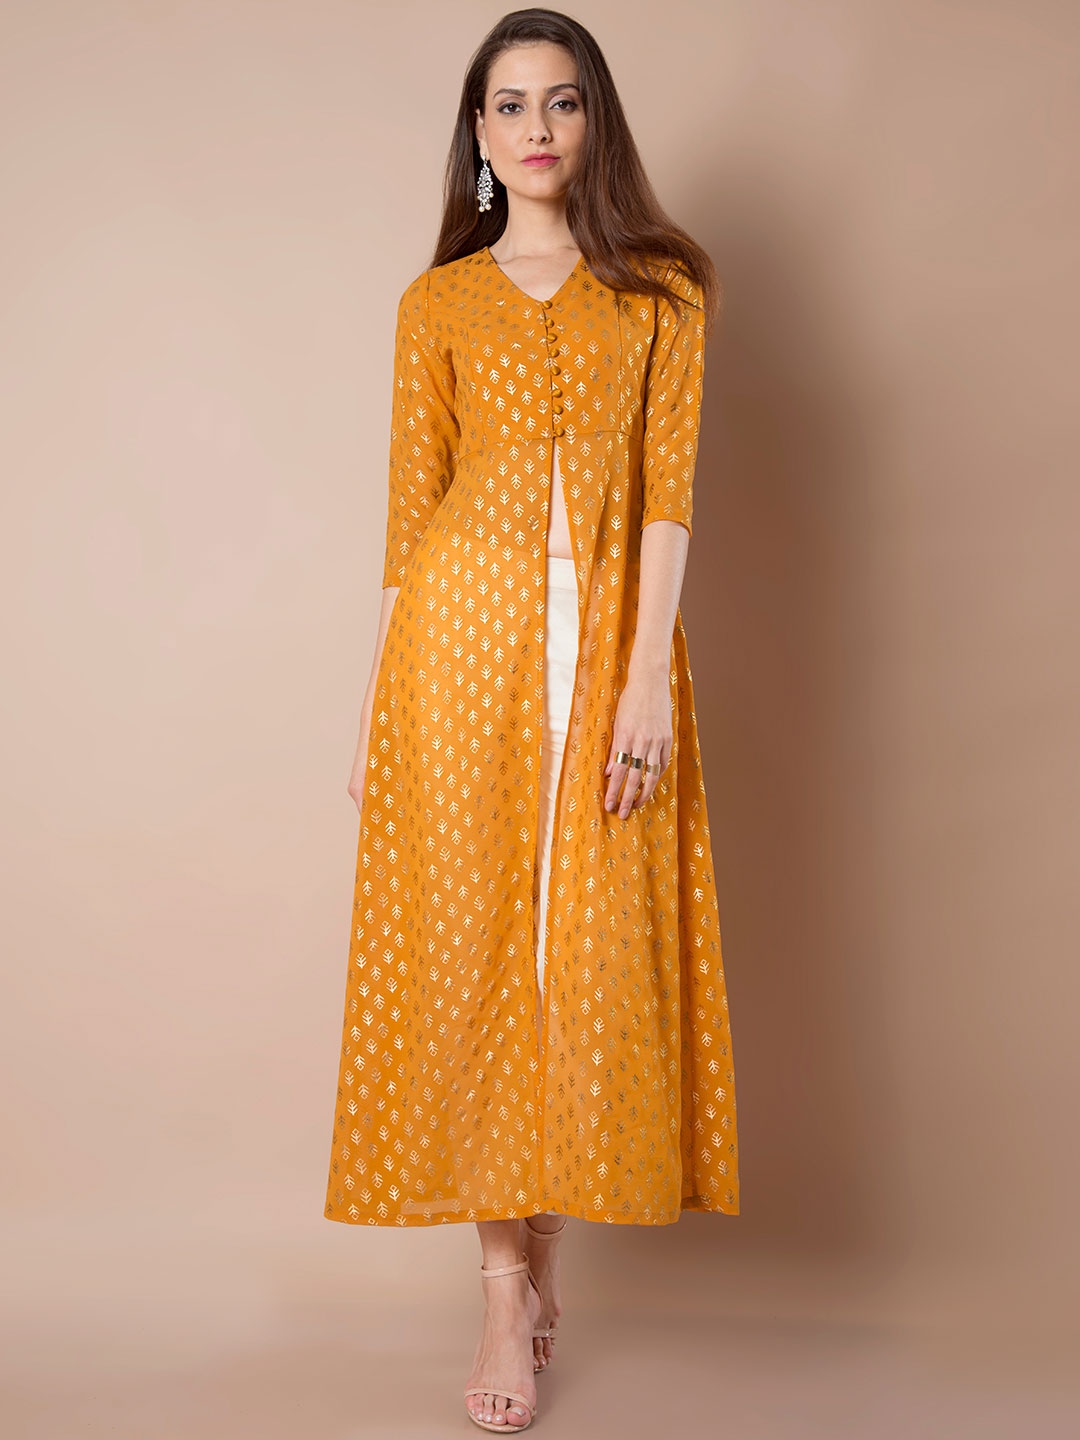 Buy online Yellow Printed Aline Kurti from ethnic wear for Women by  Aurelia for 879 at 60 off  2023 Limeroadcom